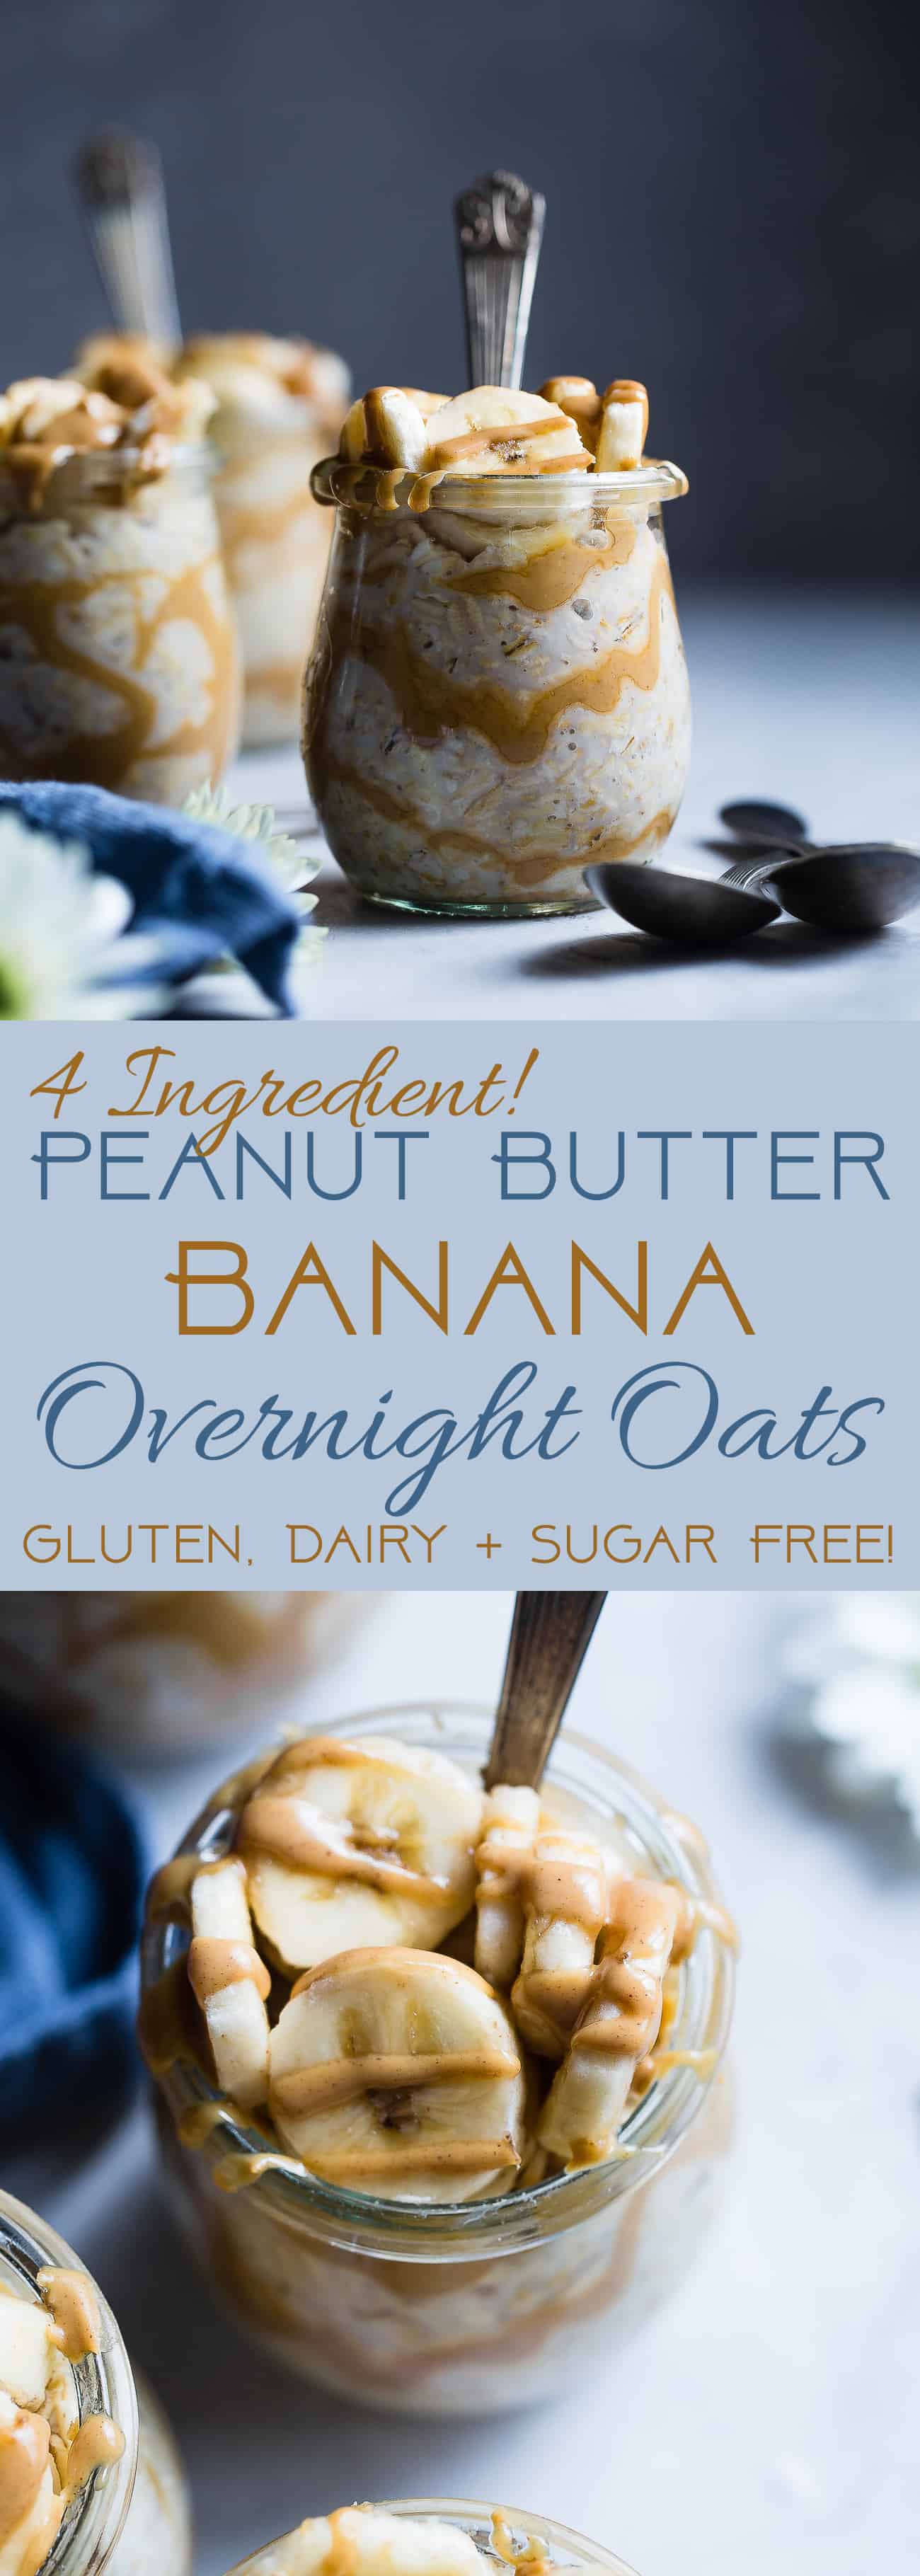 Banana Peanut Butter Overnight Oats - This make ahead, vegan overnight oats recipe is a healthy, 4 ingredient way to start the day! dairy, sugar and, gluten free and kid friendly too! | #Foodfaithfitness | #breakfast #glutenfree #kidfriendly #overnightoats #peanutbutter